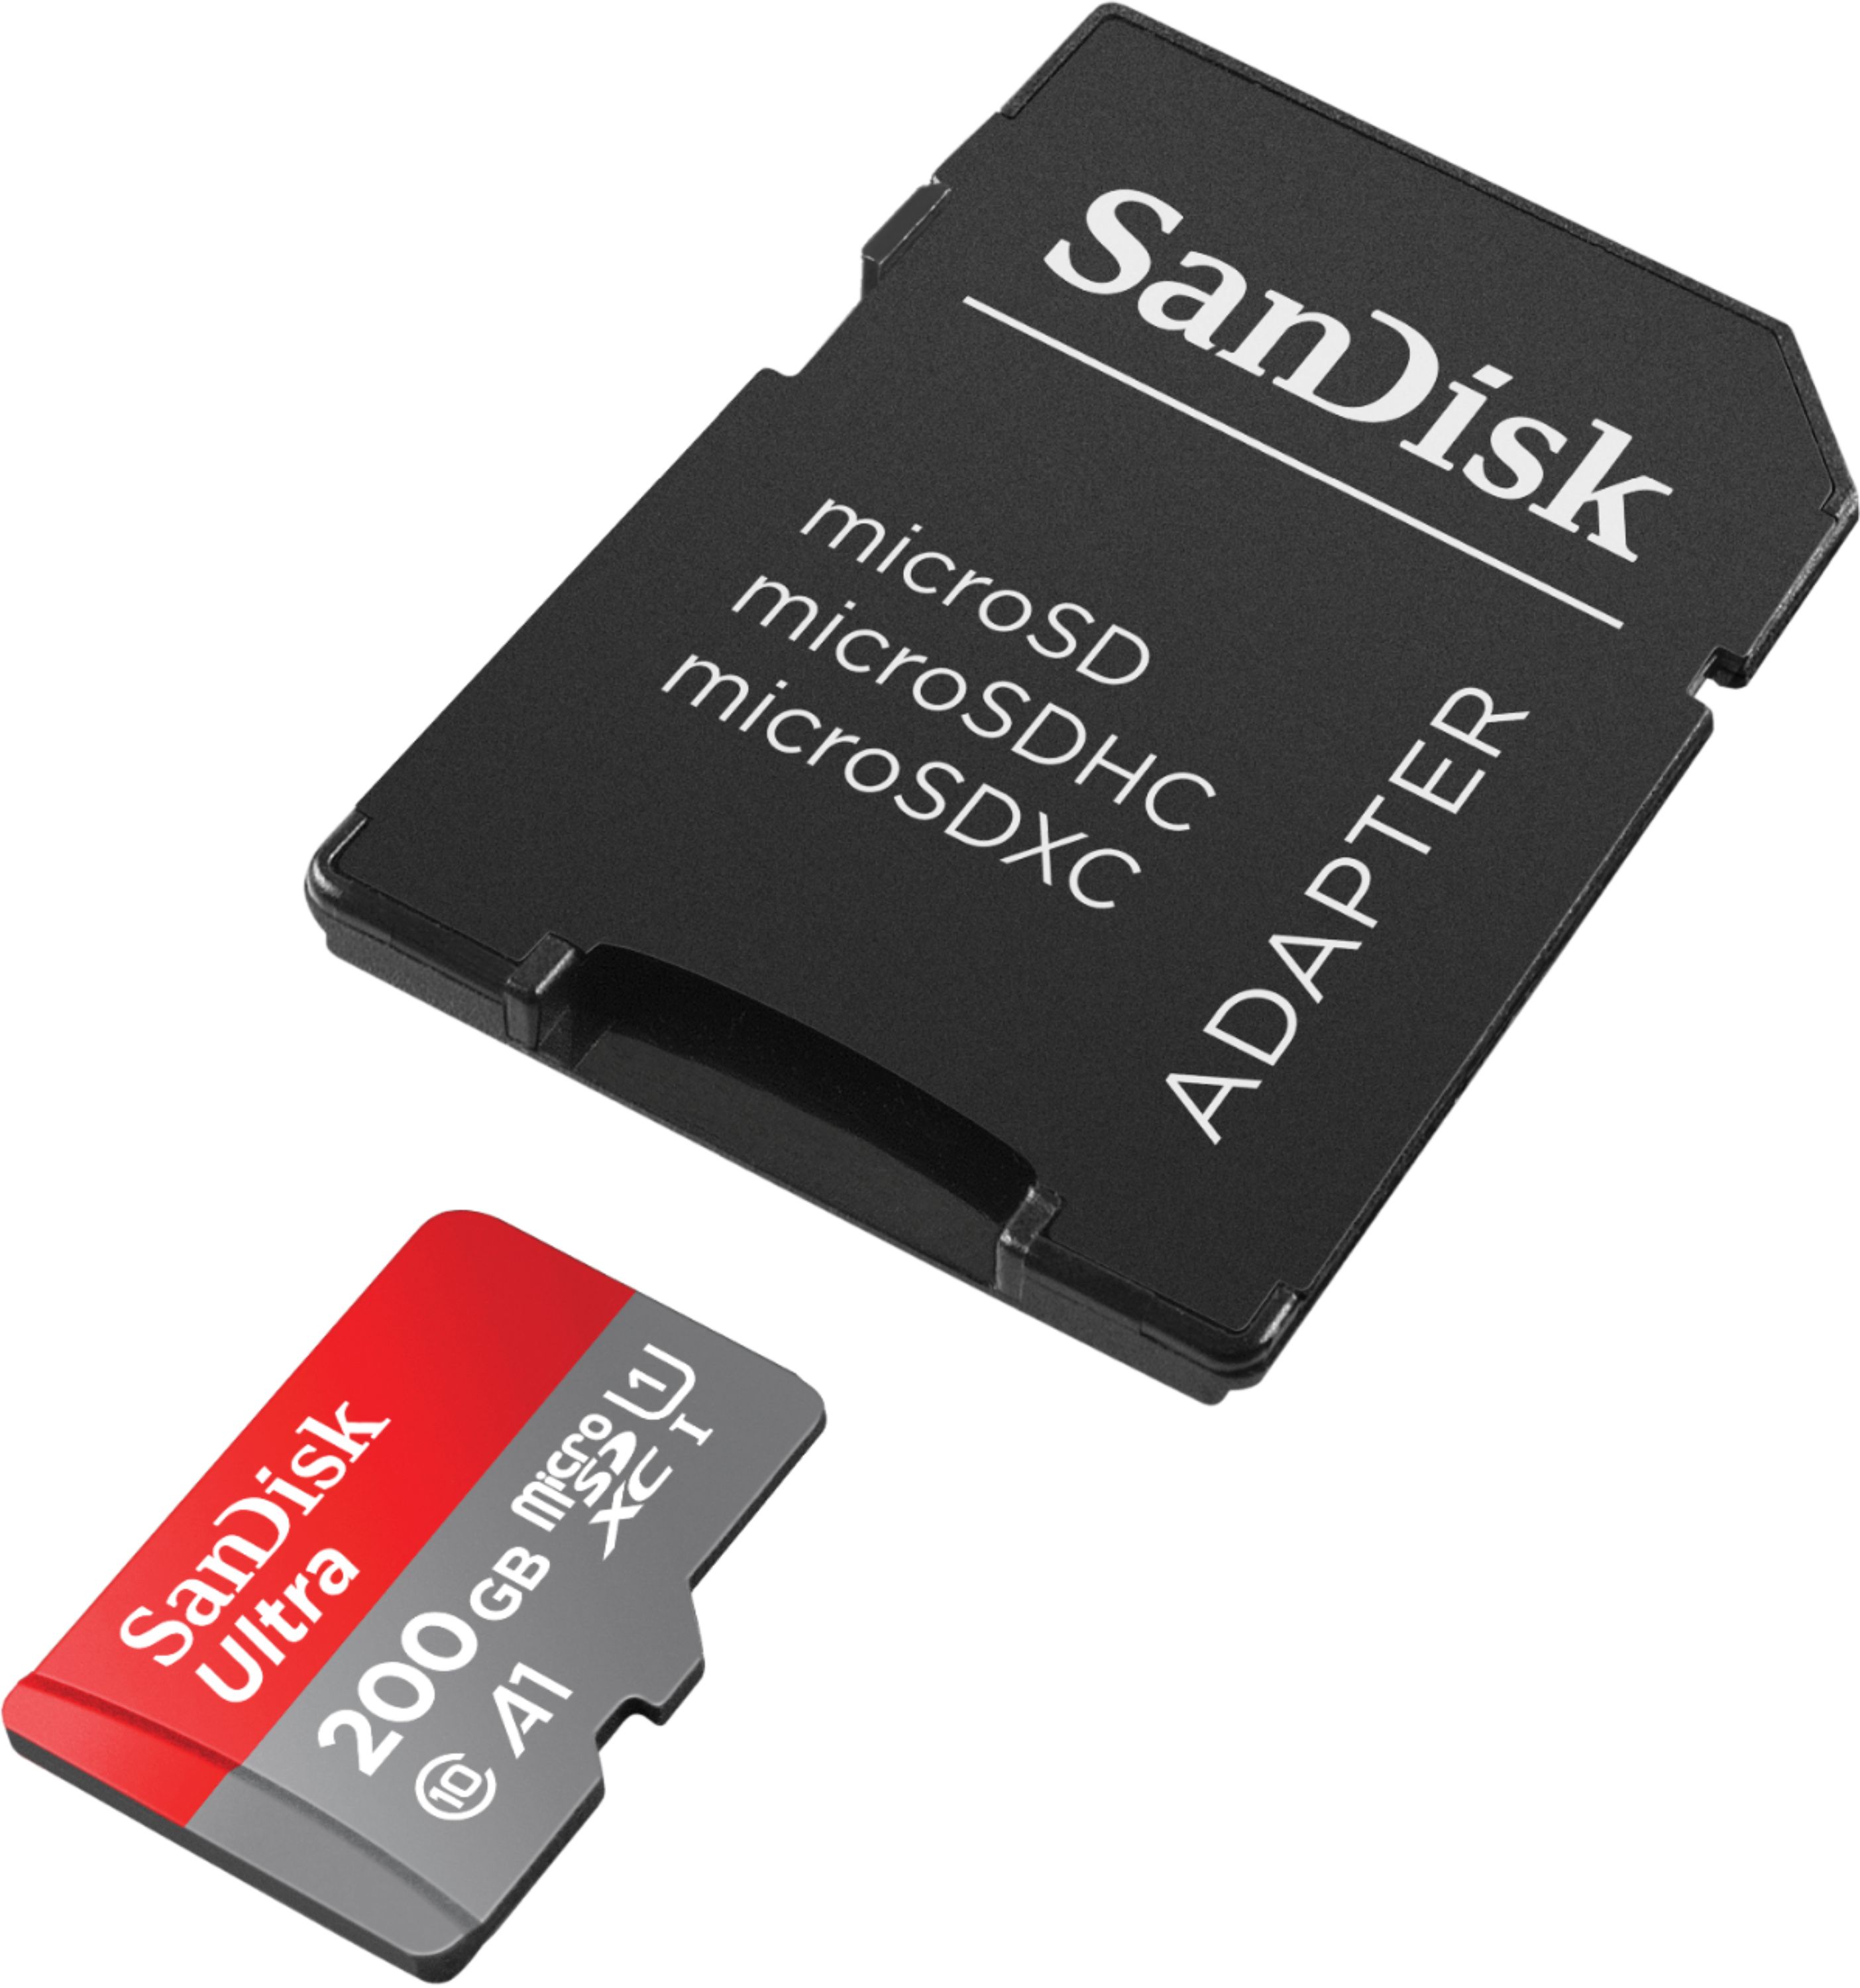 100MBs A1 U1 C10 Works with SanDisk SanDisk Ultra 200GB MicroSDXC Verified for HTC One Mini 2 by SanFlash